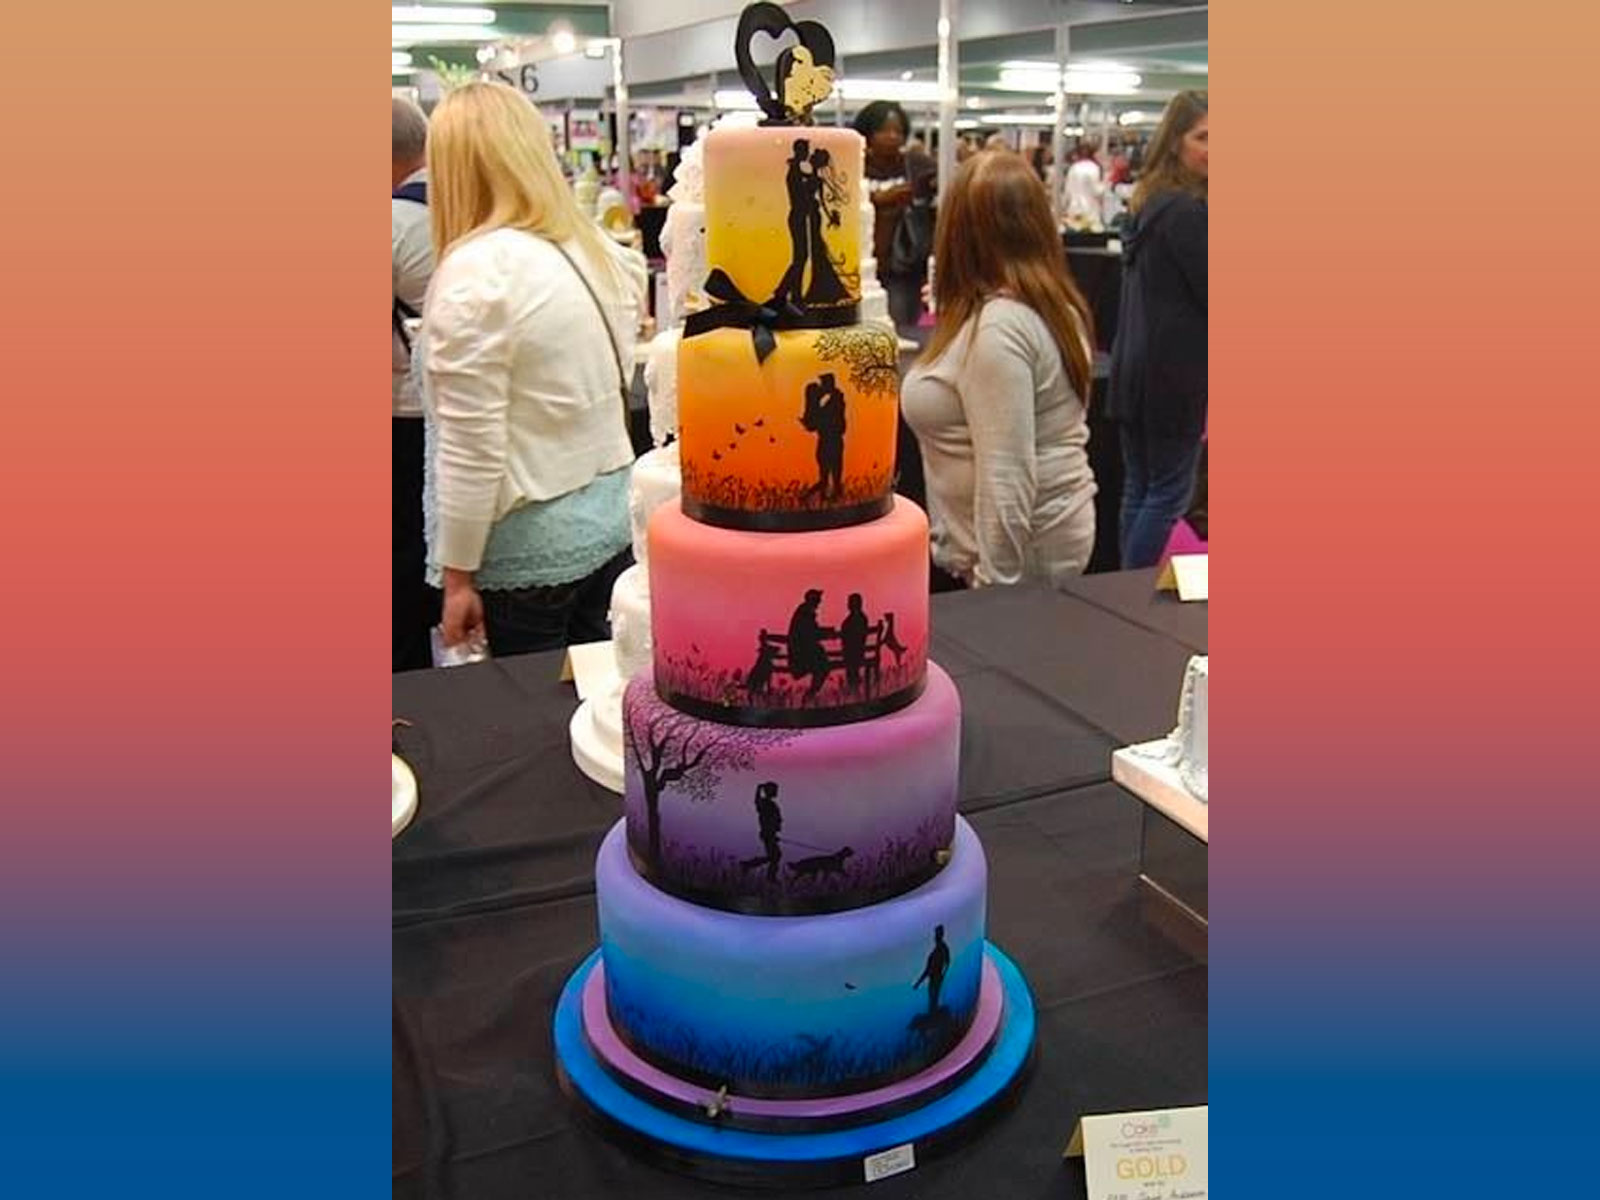 Rate These Wedding Cakes and We’ll Reveal What Your Next Boyfriend Will Be Like 815